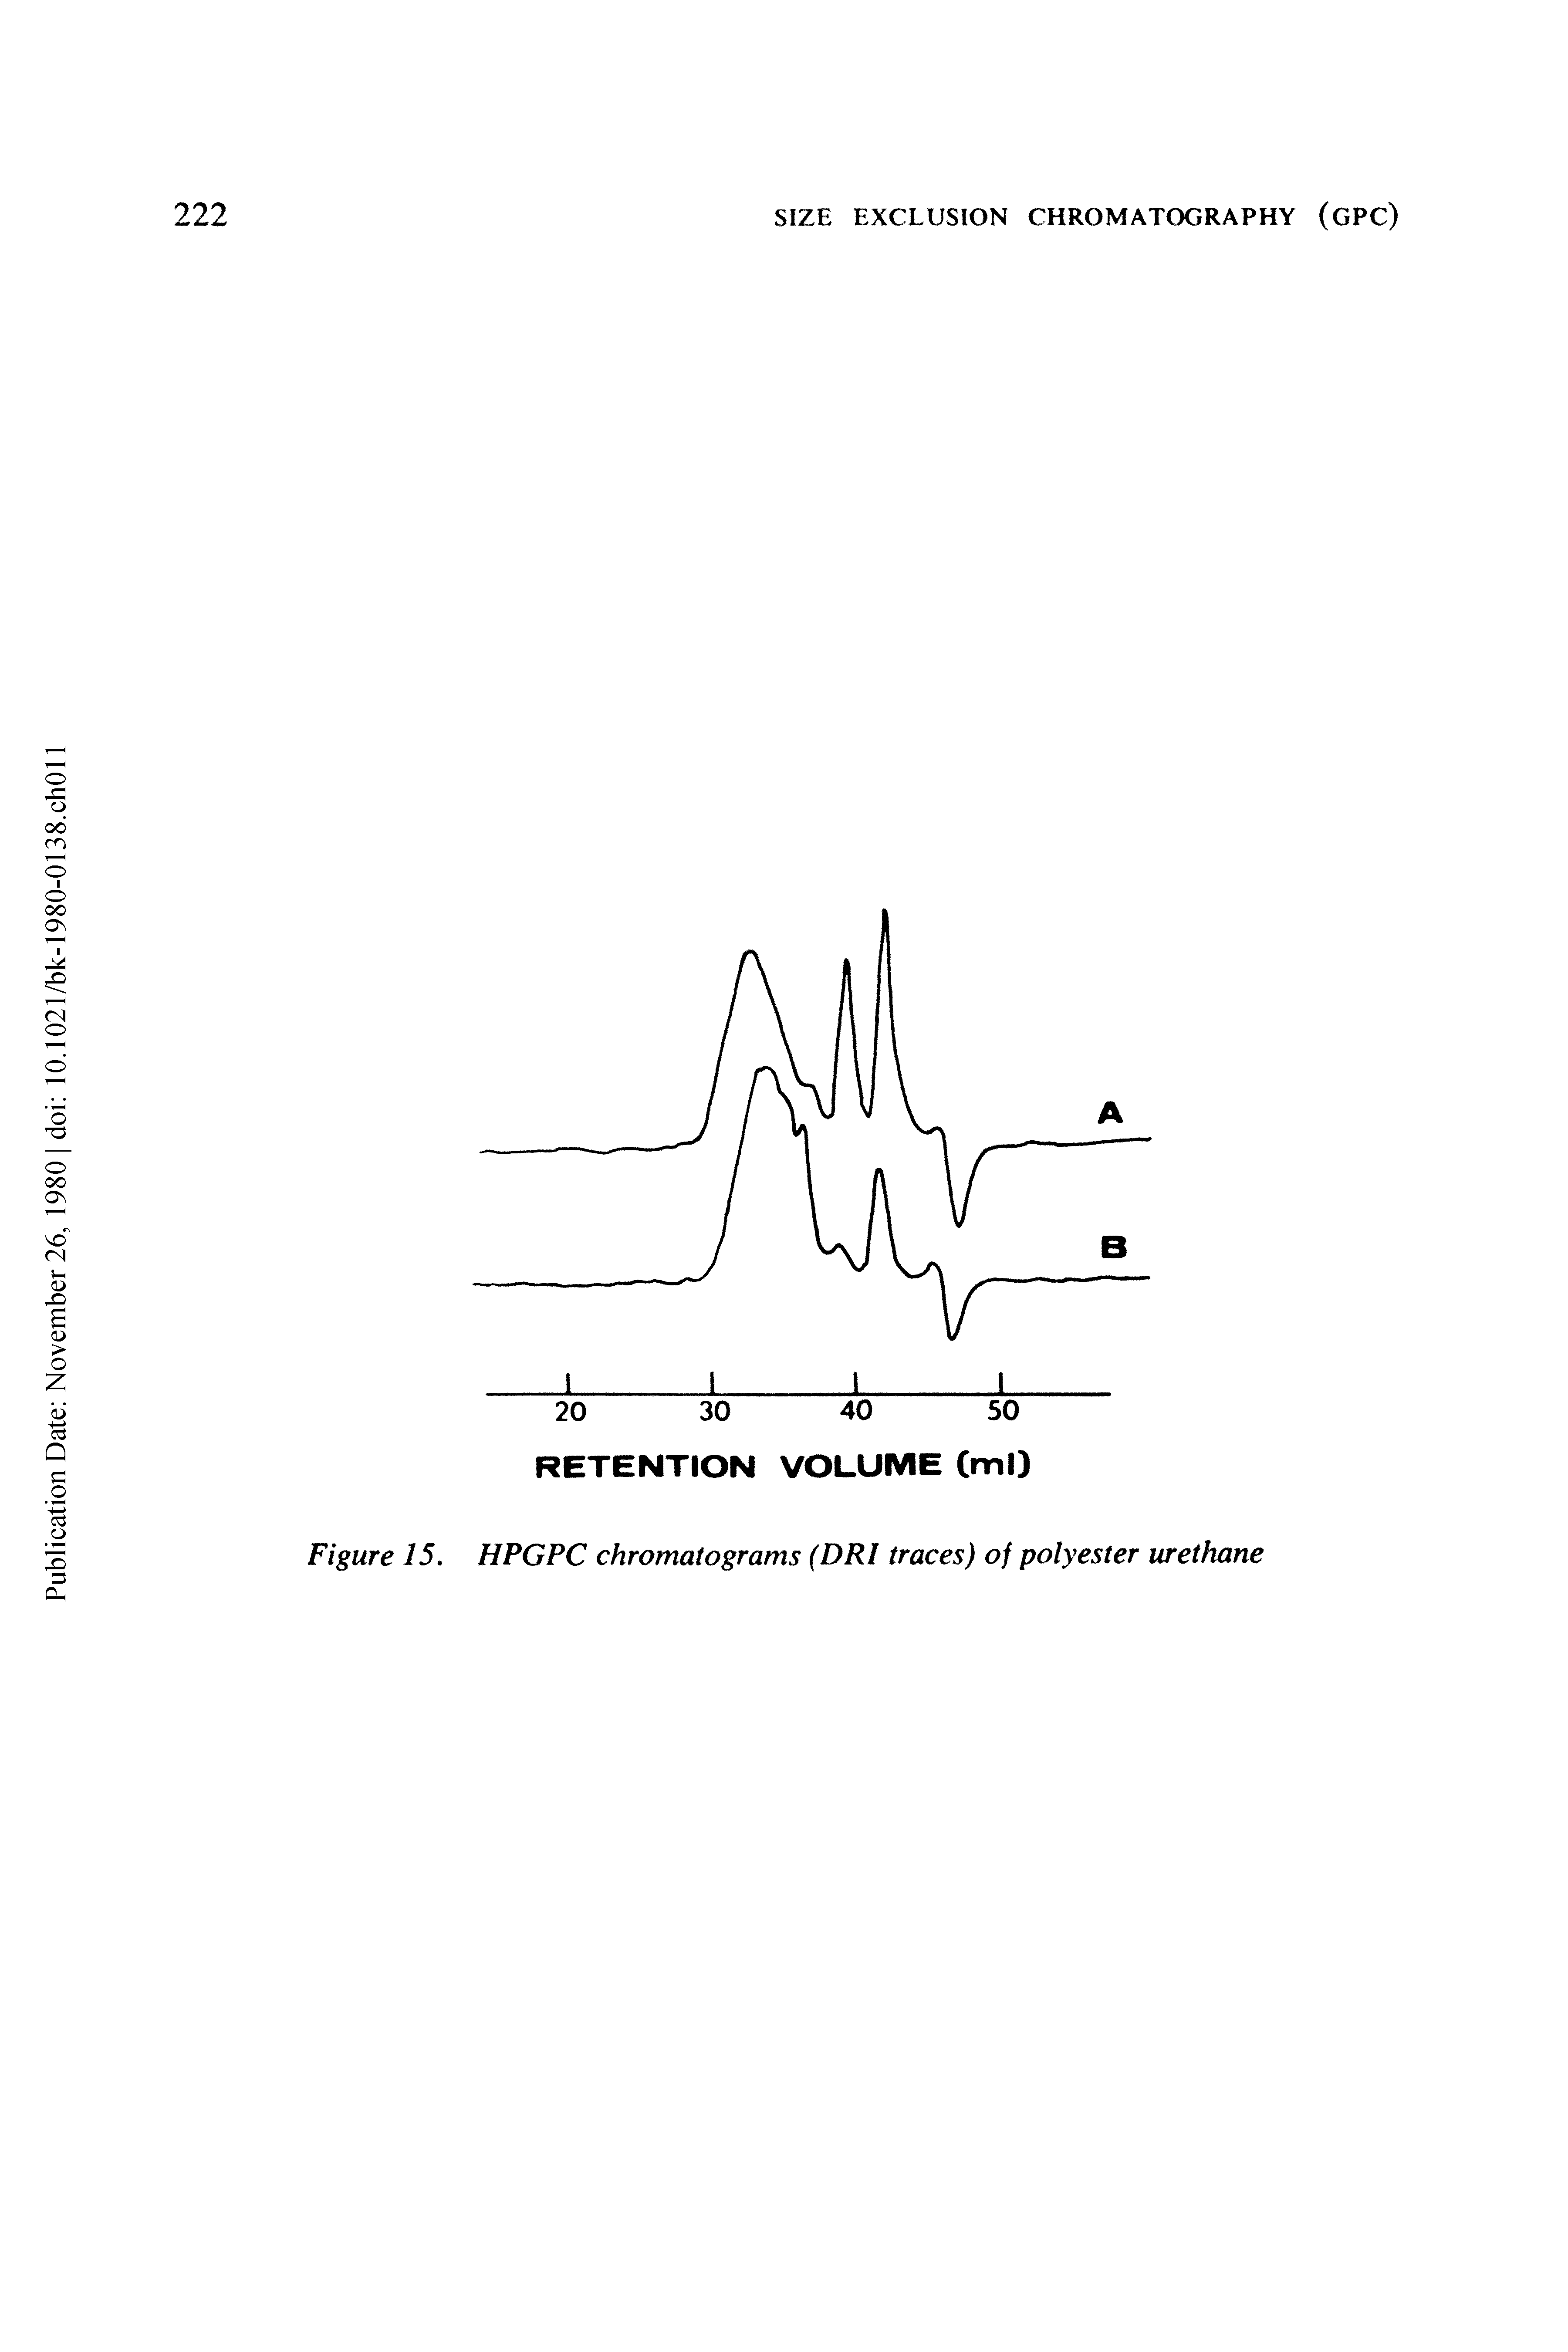 Figure 15. HPGPC chromatograms (DRl traces) of polyester urethane...